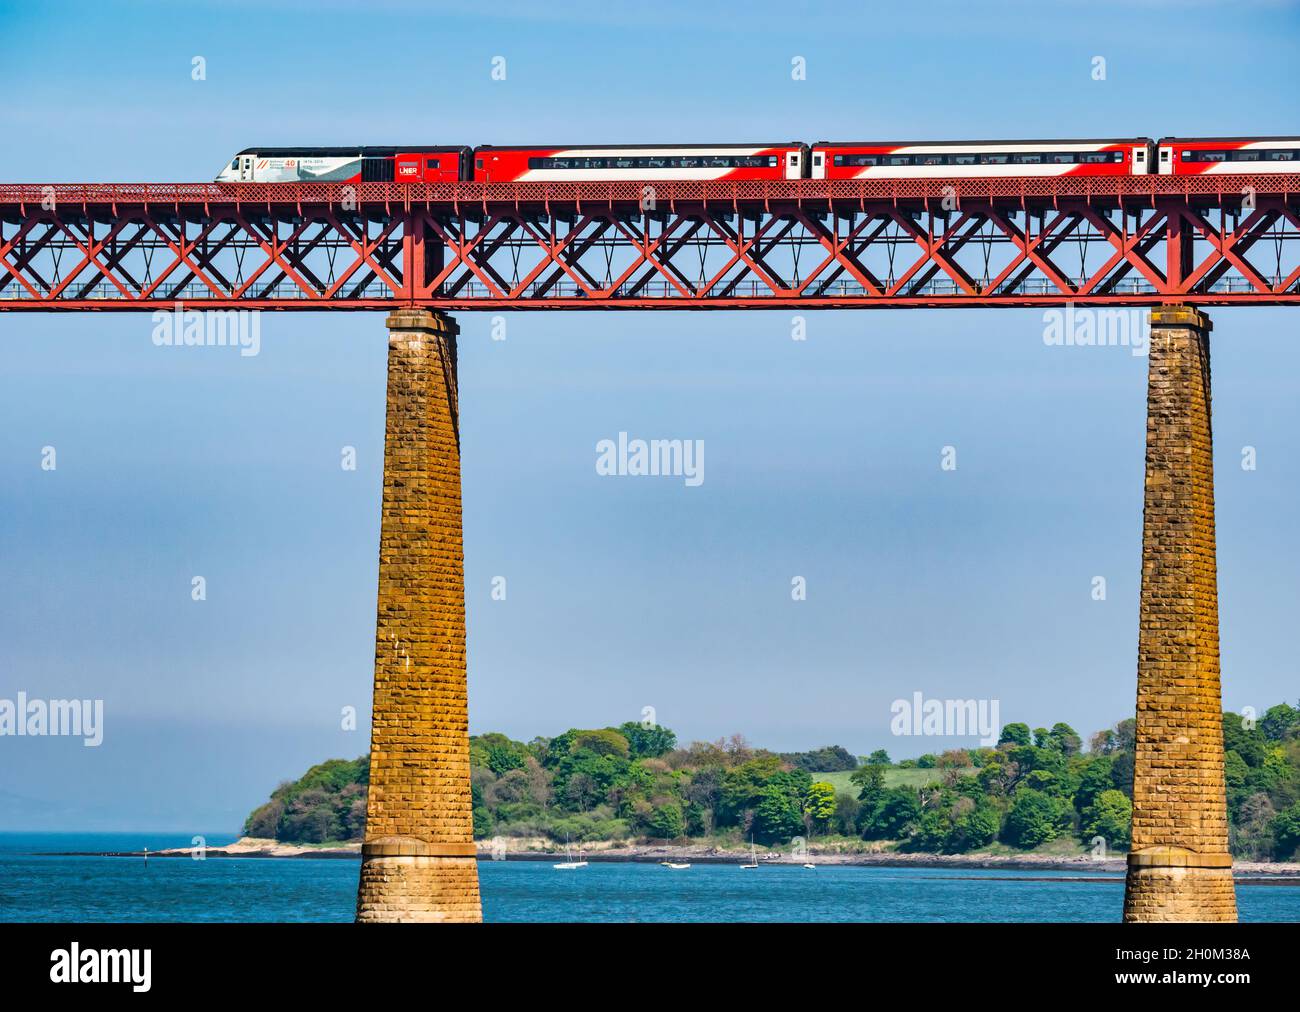 LNER train crossing iconic Forth Rail Bridge over Firth of Forth on sunny day, Scotland, UK Stock Photo